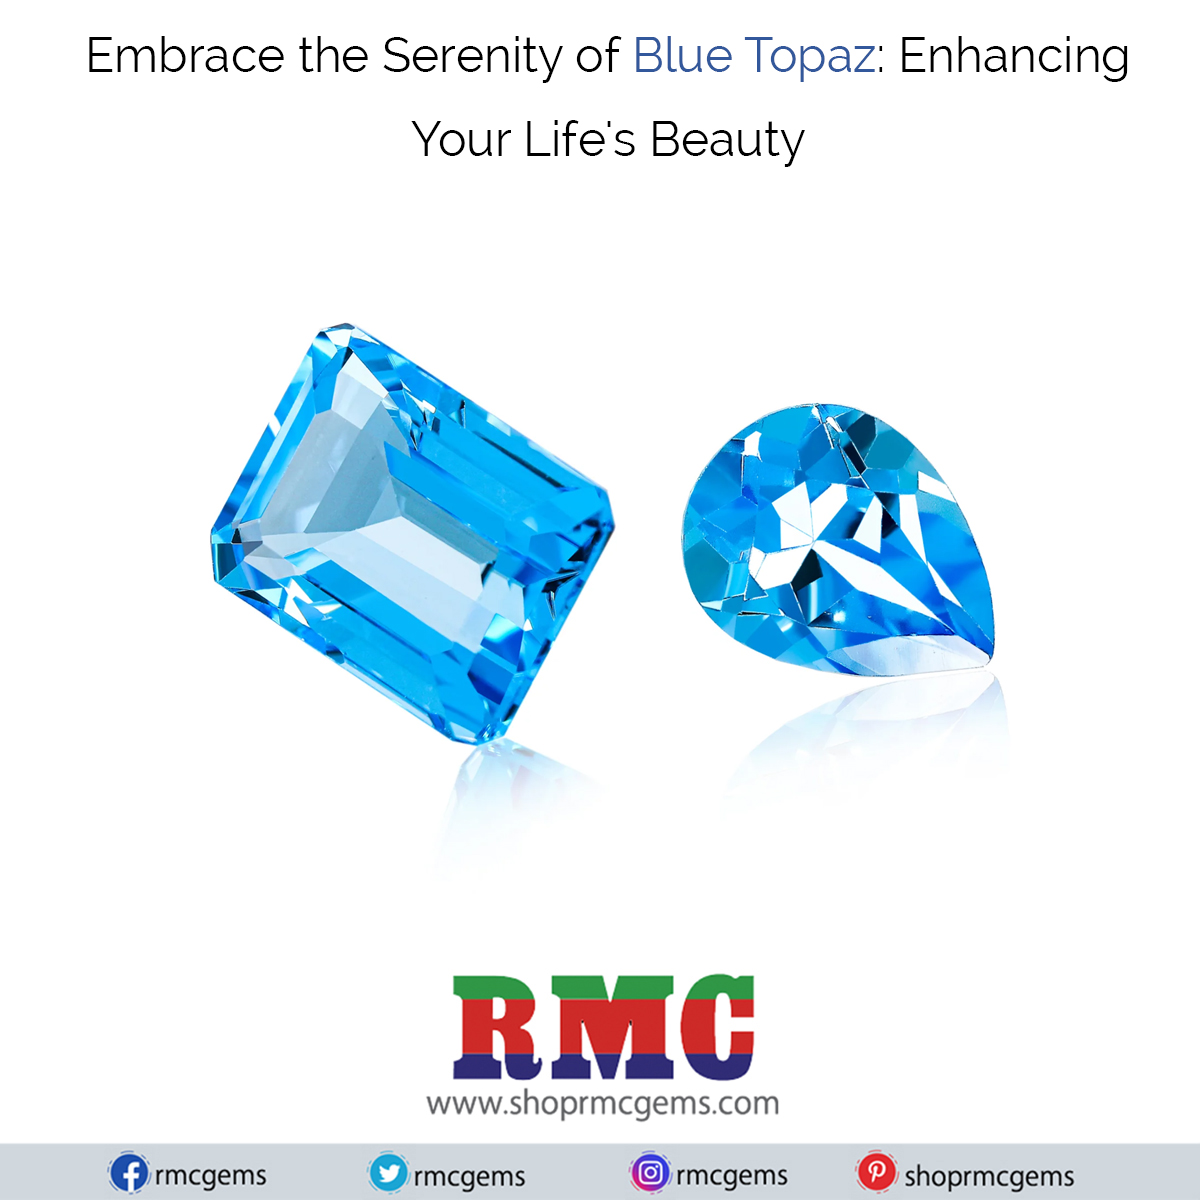 Blue Topaz Brilliance: Discover the Magic with RMC GEMS, the World’s Number 1 Supplier